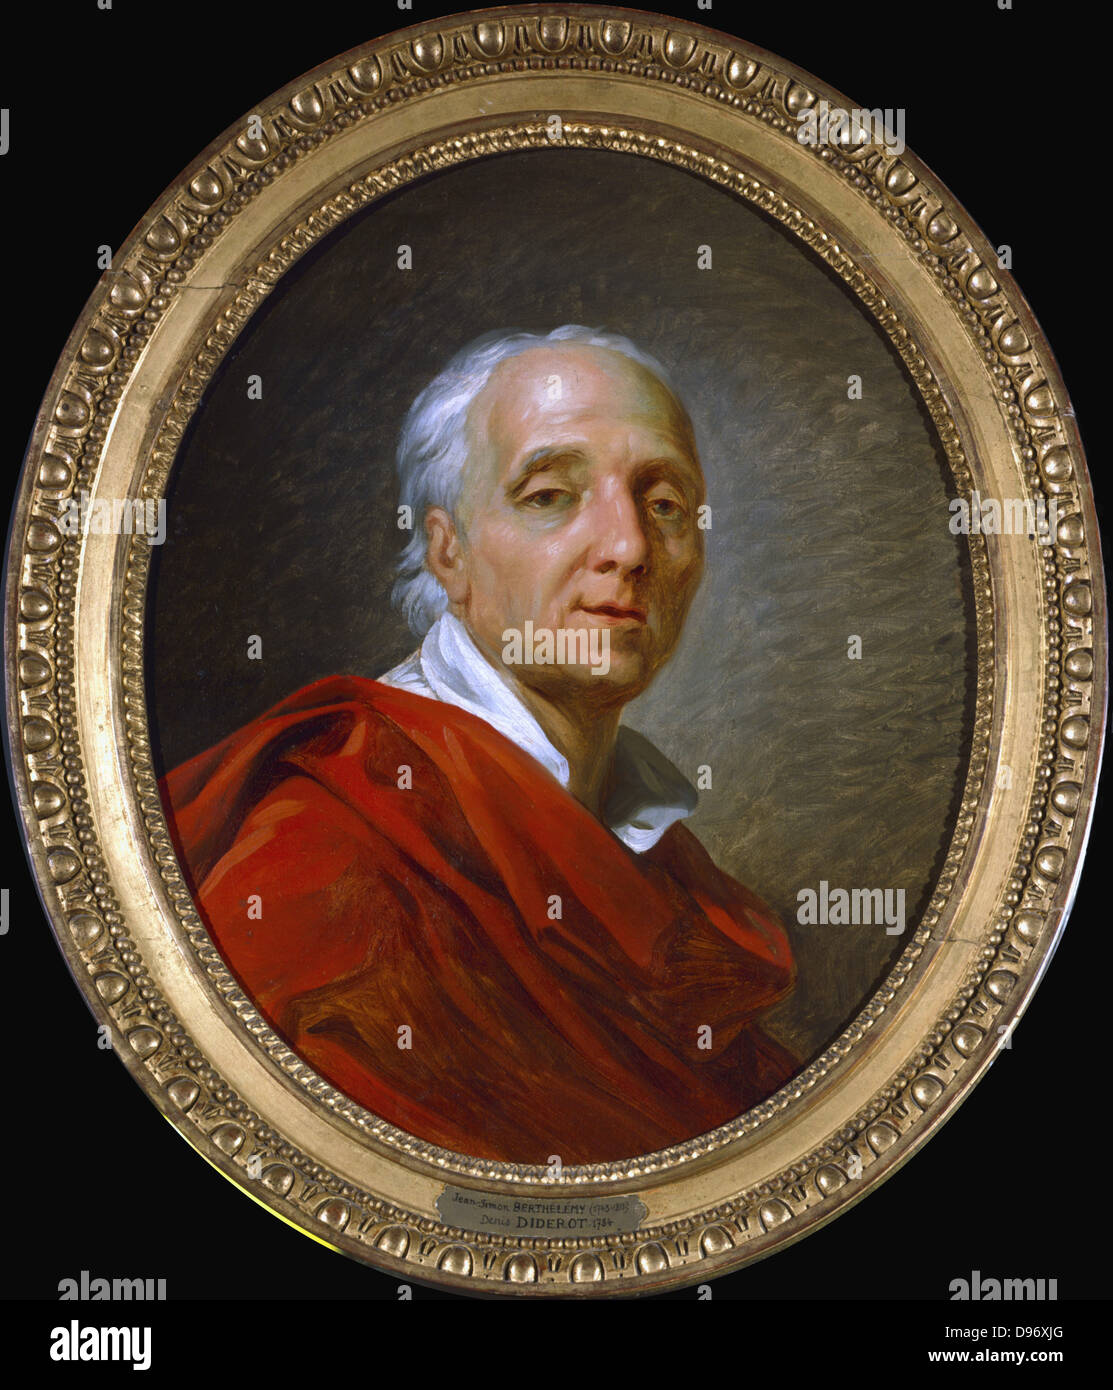 Denis Diderot (1713-1784) French man of letters and encyclopaedist. Portrait by Antoine Barthelemy or Berthelmy. Oil on canvas. Stock Photo